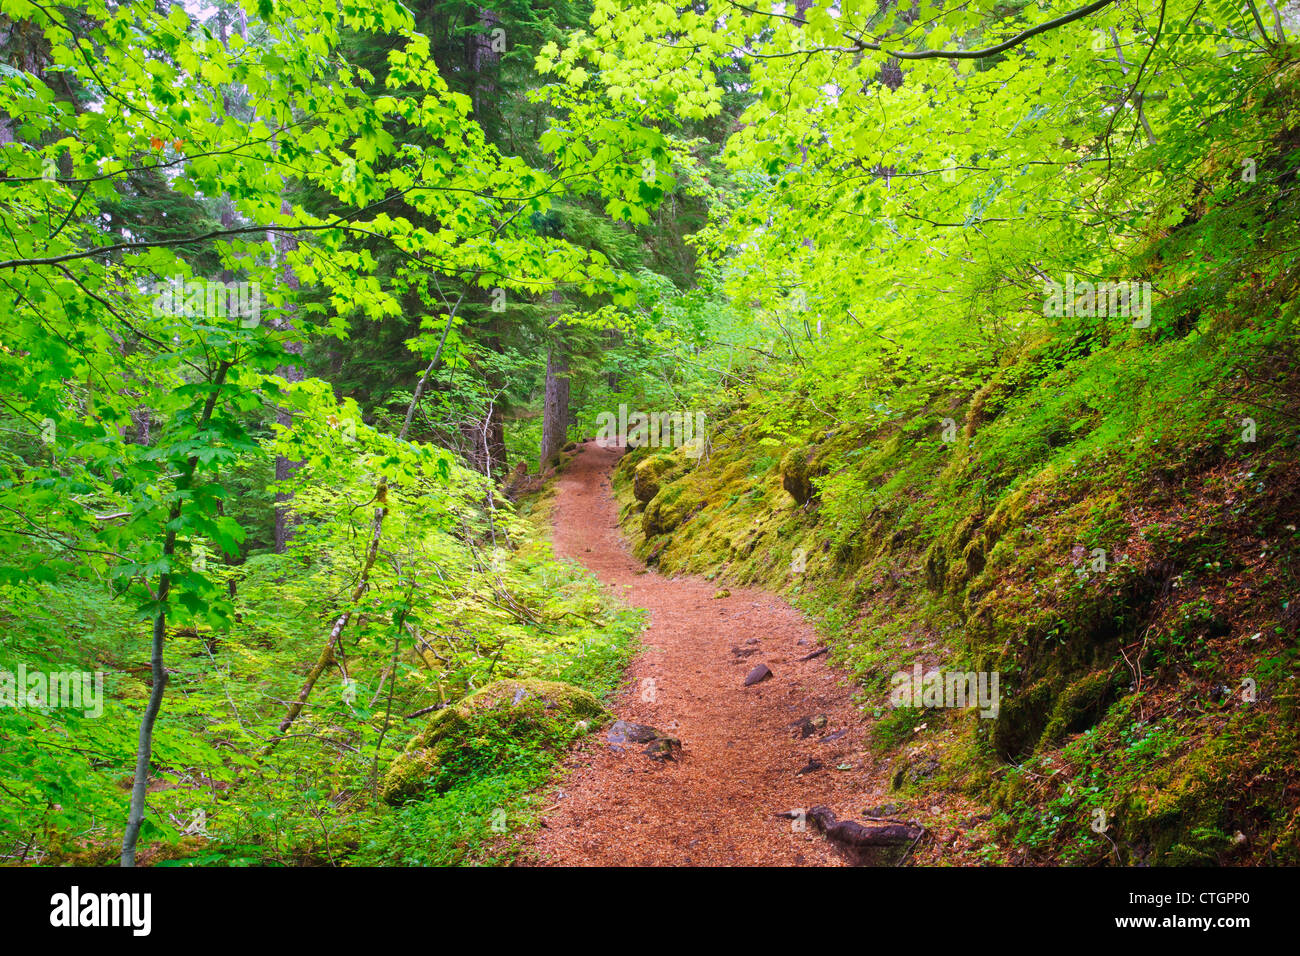 Trail To Proxy Falls In Willamette National Forest; Oregon, United States of America Stock Photo